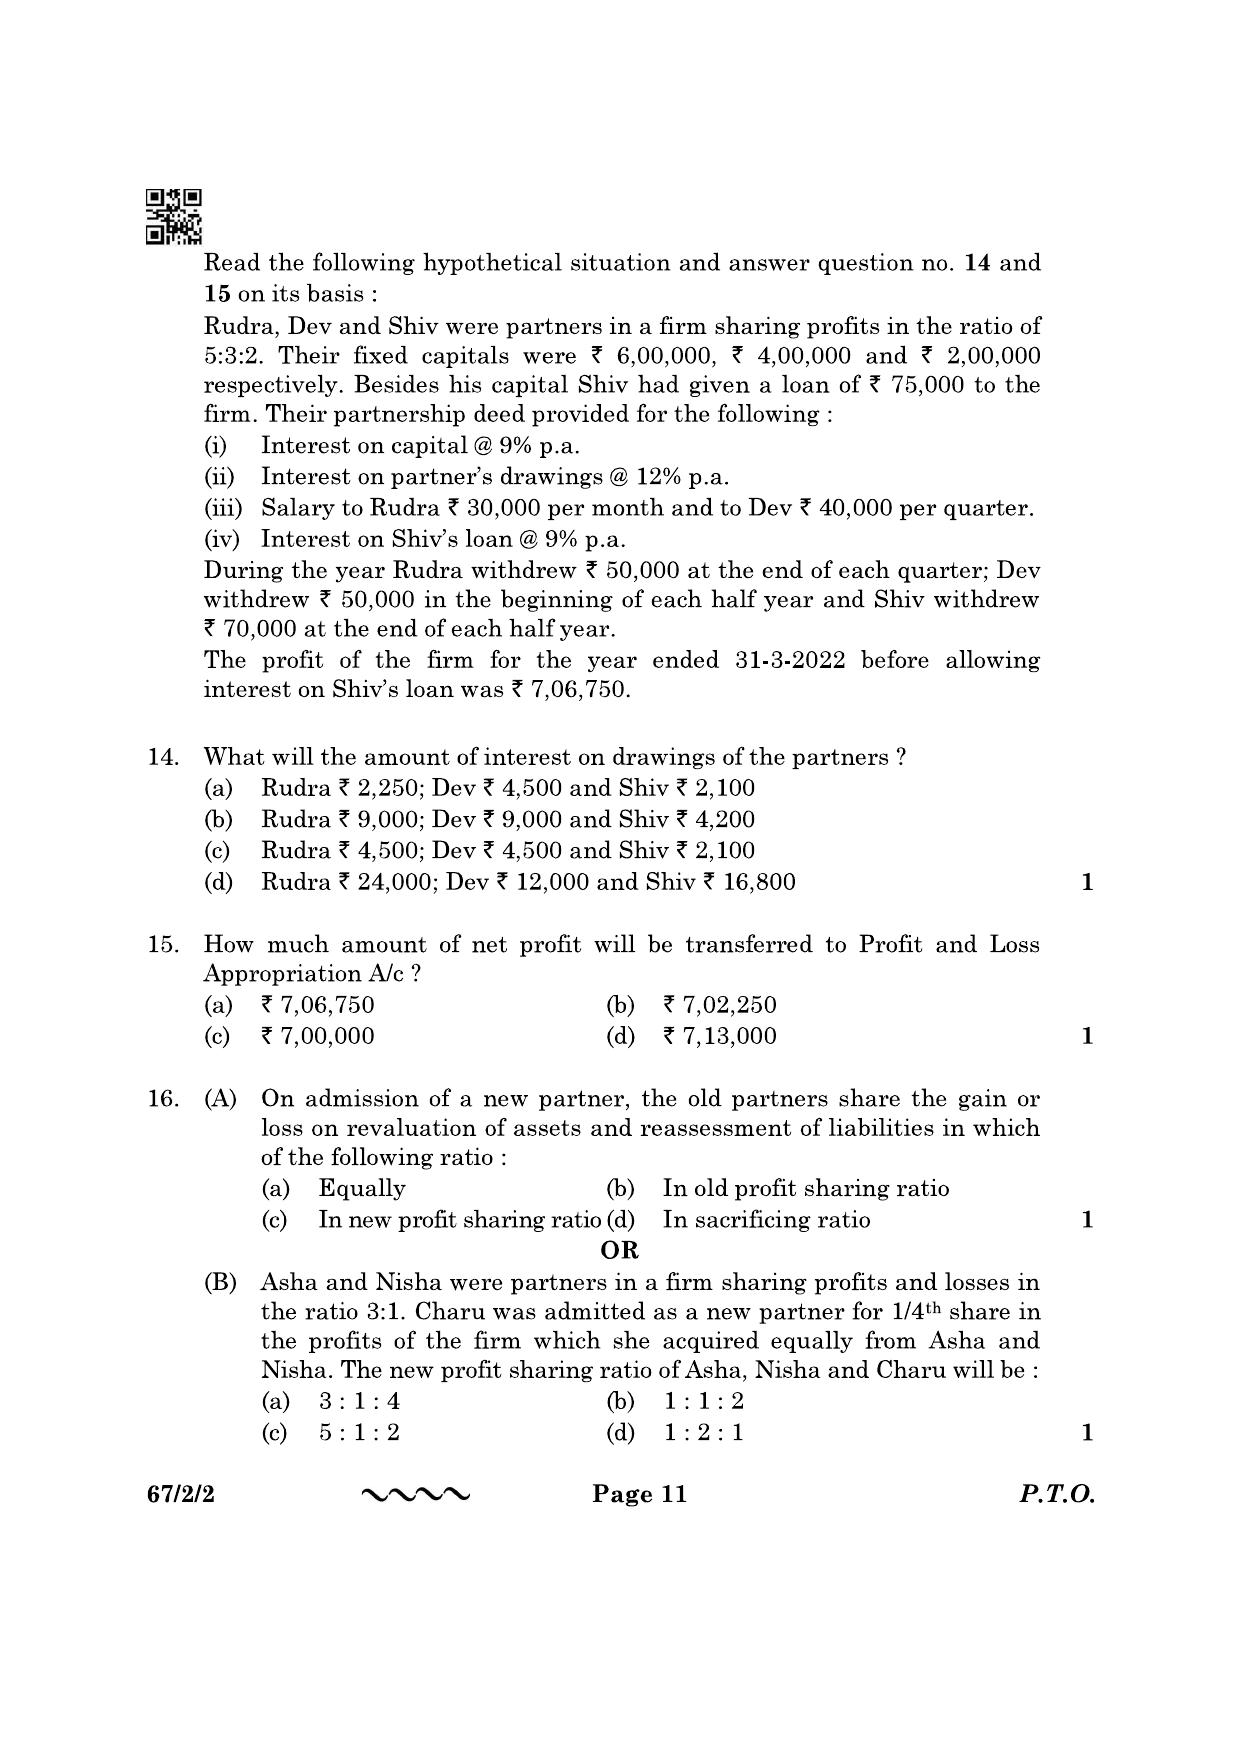 CBSE Class 12 67-2-2 Accountancy 2023 Question Paper - Page 11